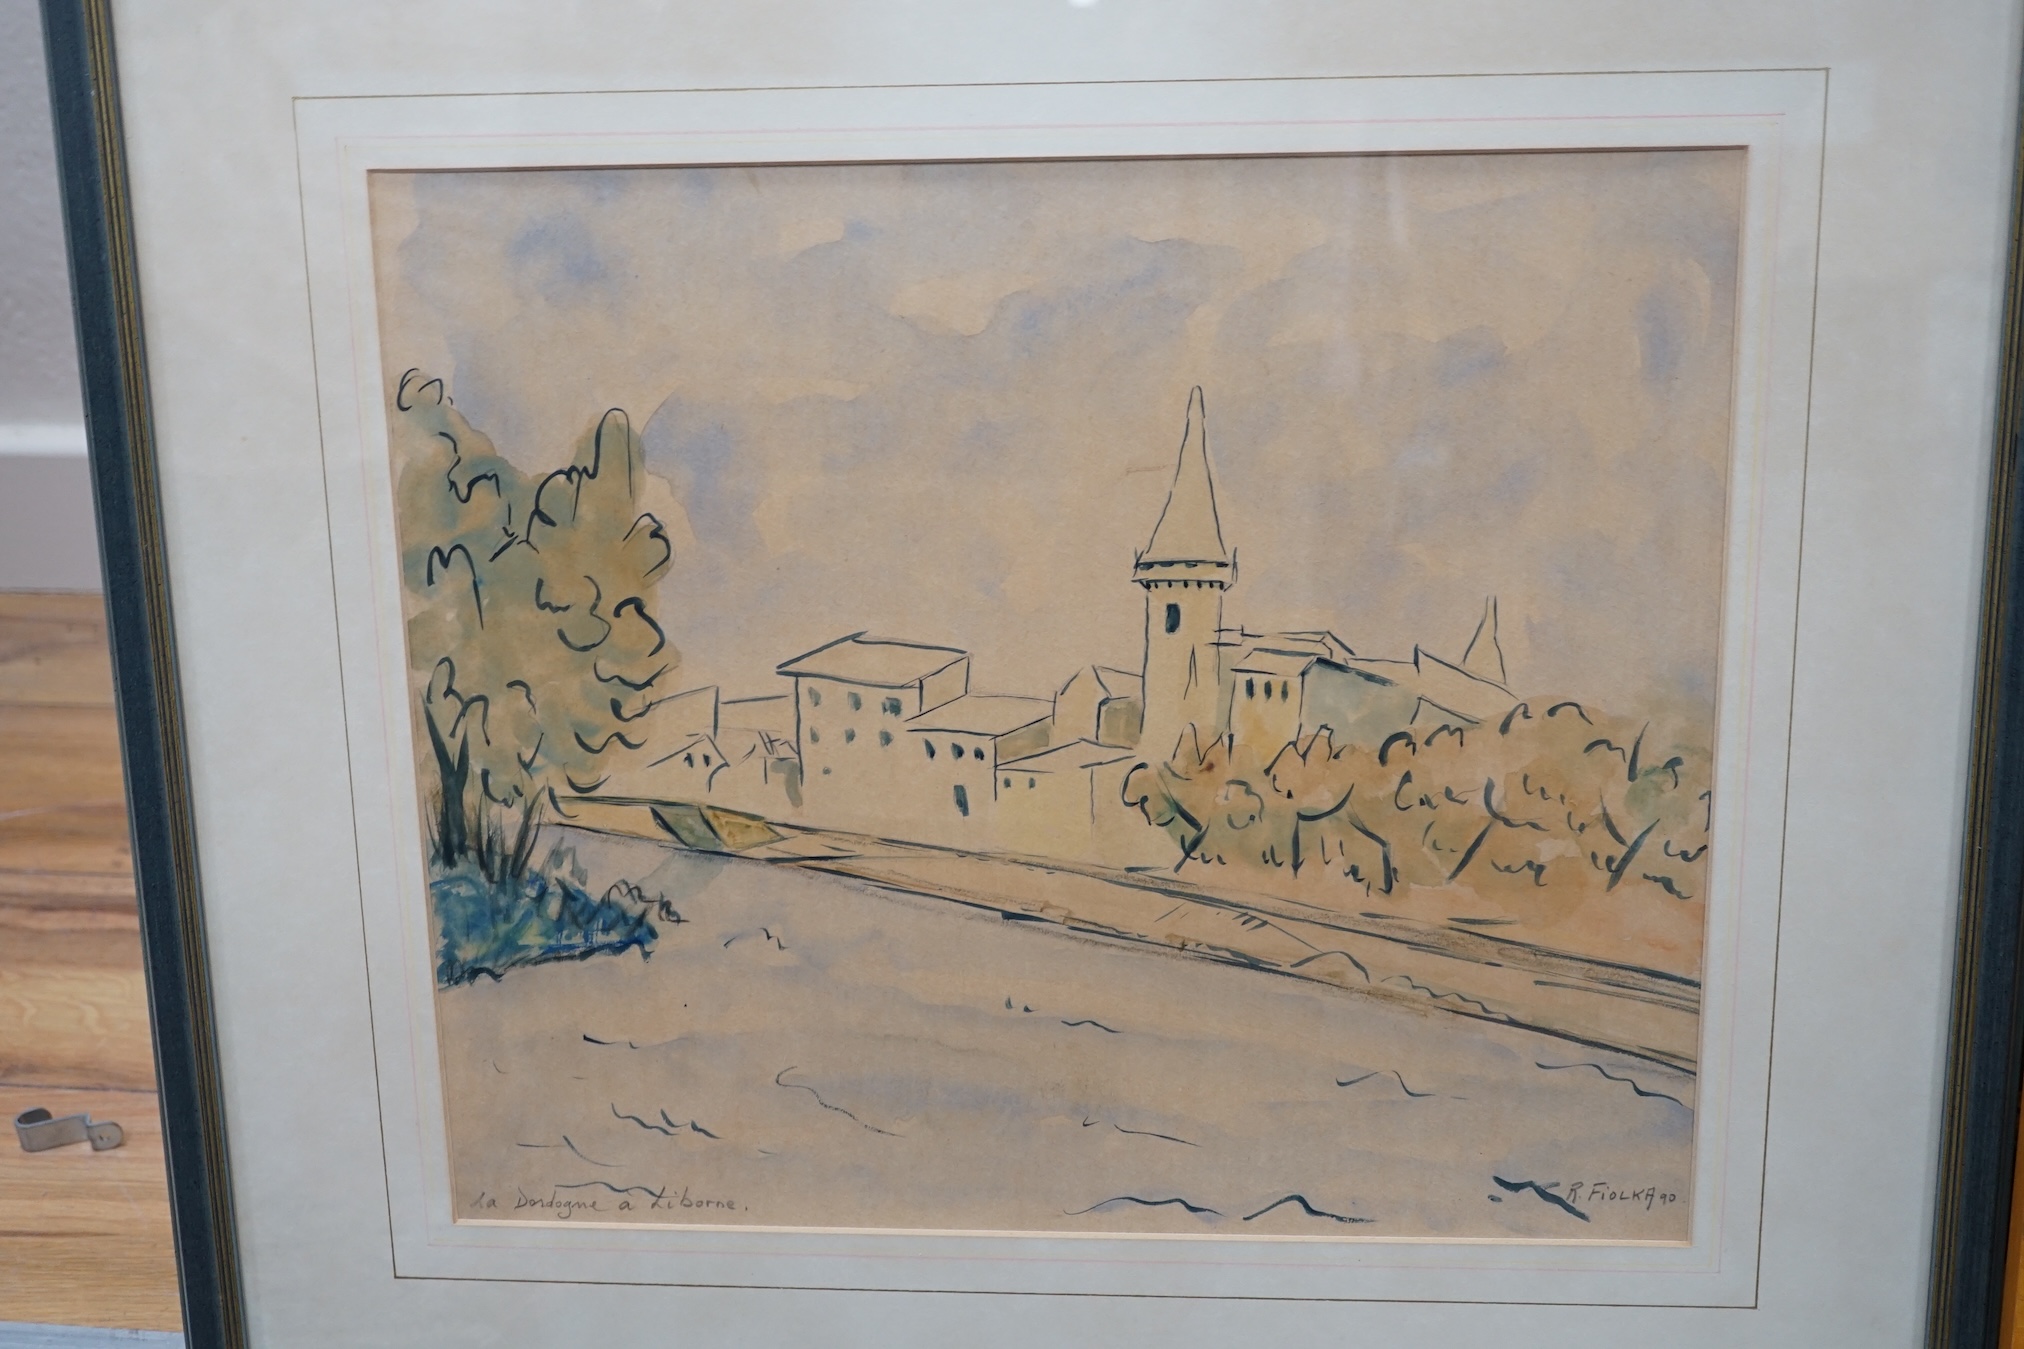 R. Fiolka, two ink and watercolours, 'George Sands’ House', signed and dated ‘90 and 'La Dordogne à Liborne', signed and dated ’90, largest 34 x 39cm. Condition - fair to good, some discolouration